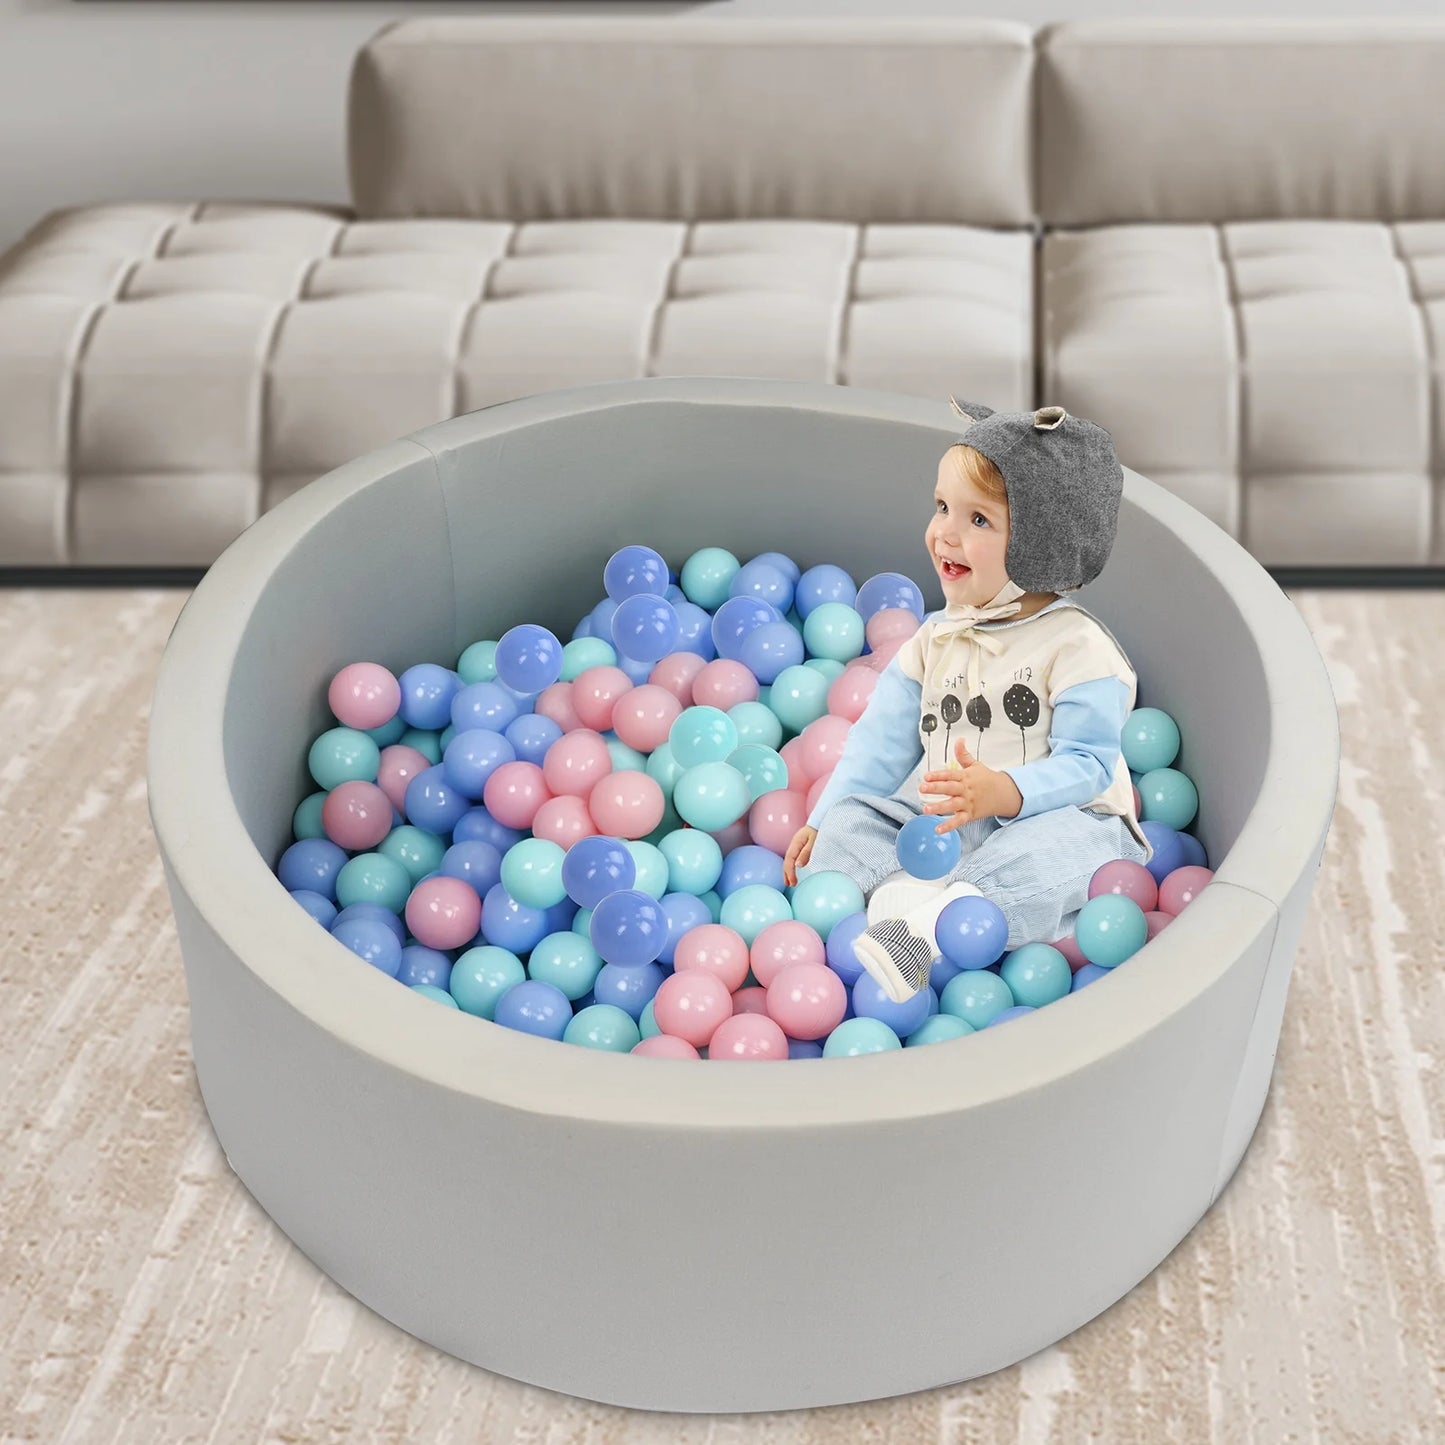 XJD Large Foam Ball Pit for Children Toddlers, 47.2” Soft Round Ball Pits for Kids with 200 Colored 2.2" Plastic Balls, Baby Playpen Ball Pool, Ideal Gift for Indoor and Outdoor Game